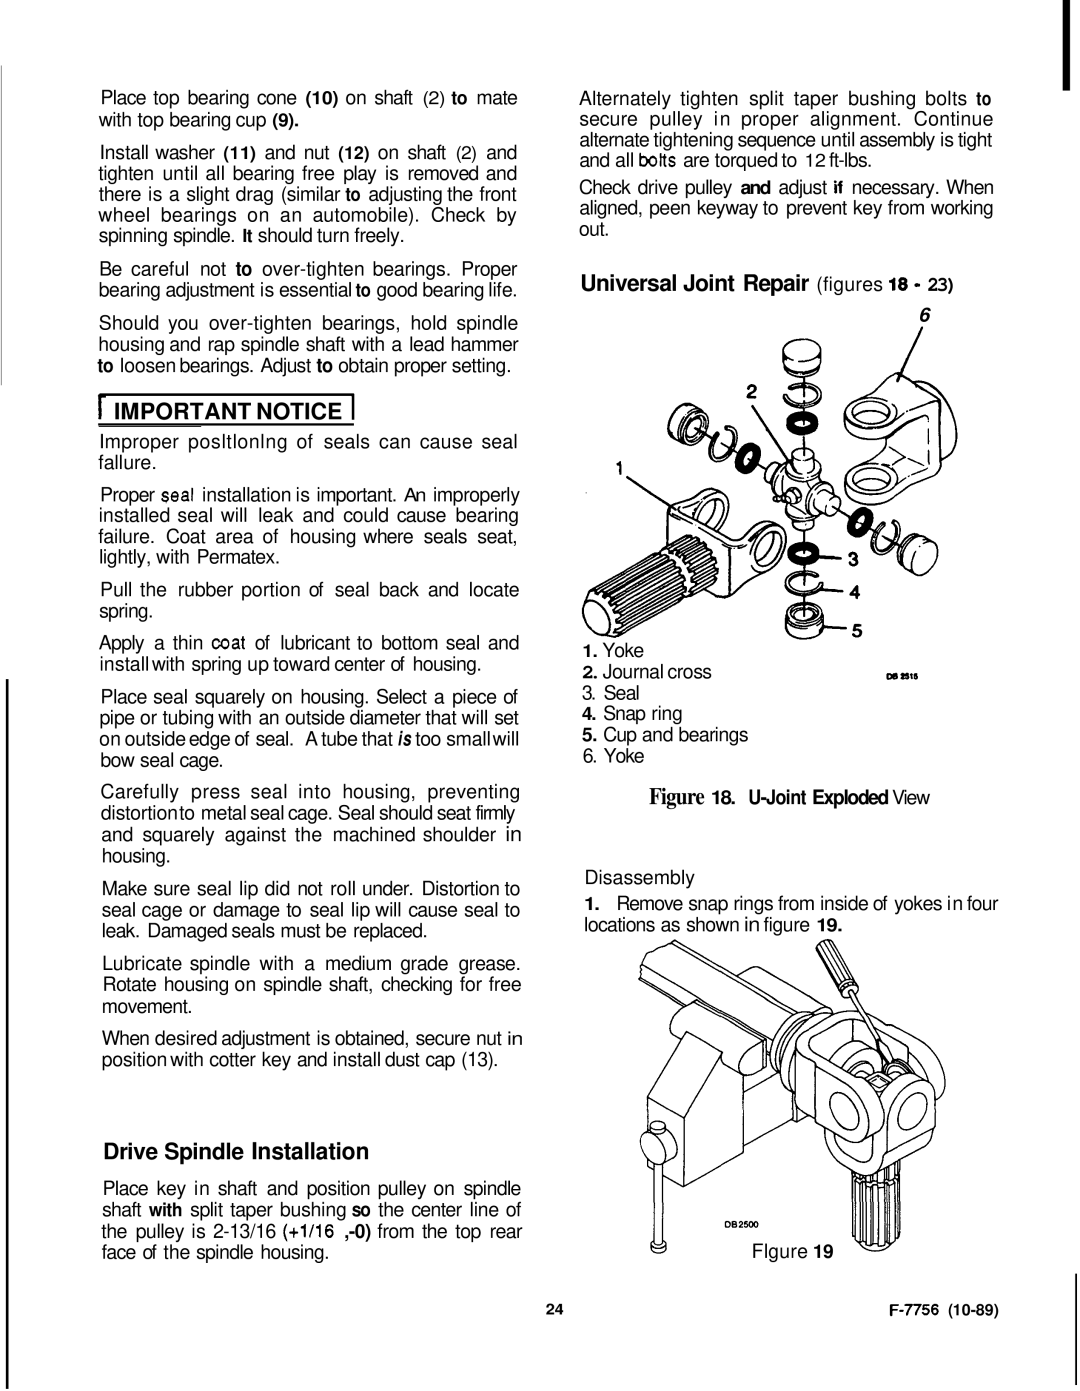 Honda Power Equipment RM752A manual Important Notice, Drive Spindle Installation, Universal Joint Repair figures 18 